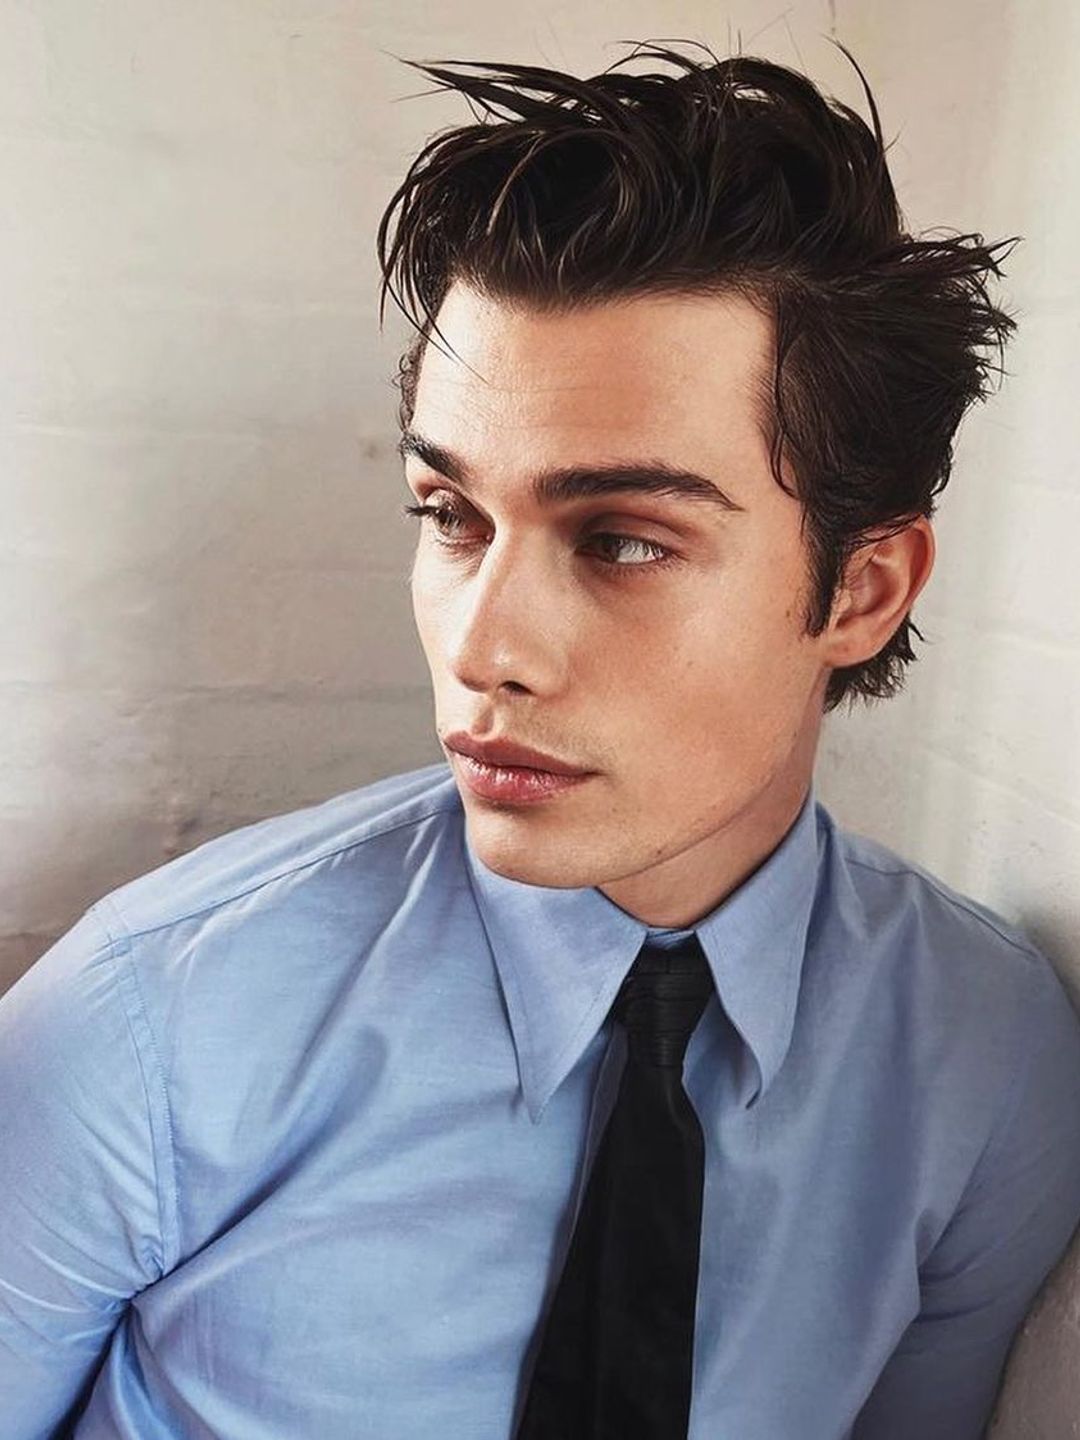 Nicholas Galitzine who is his mother